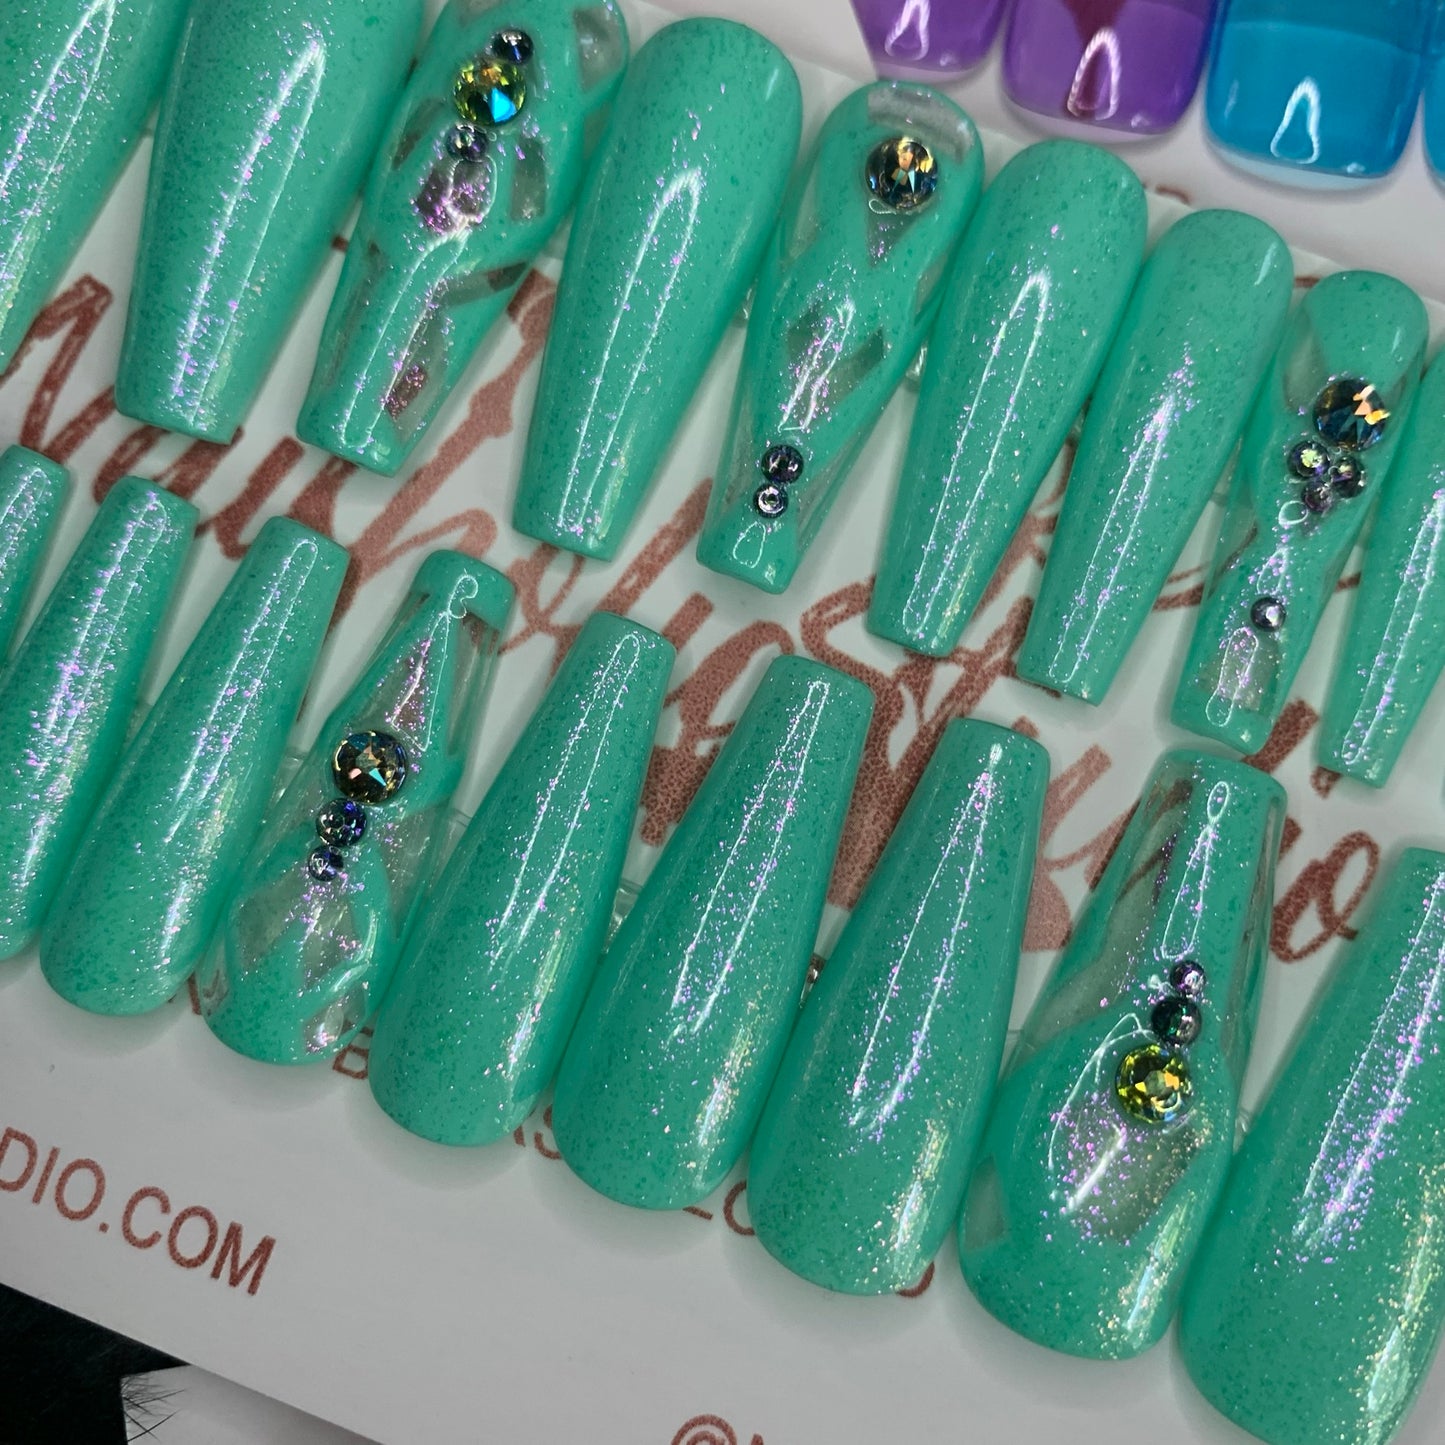 Mint Condition | Long Ballerina | Press on Nails | READY TO SHIP